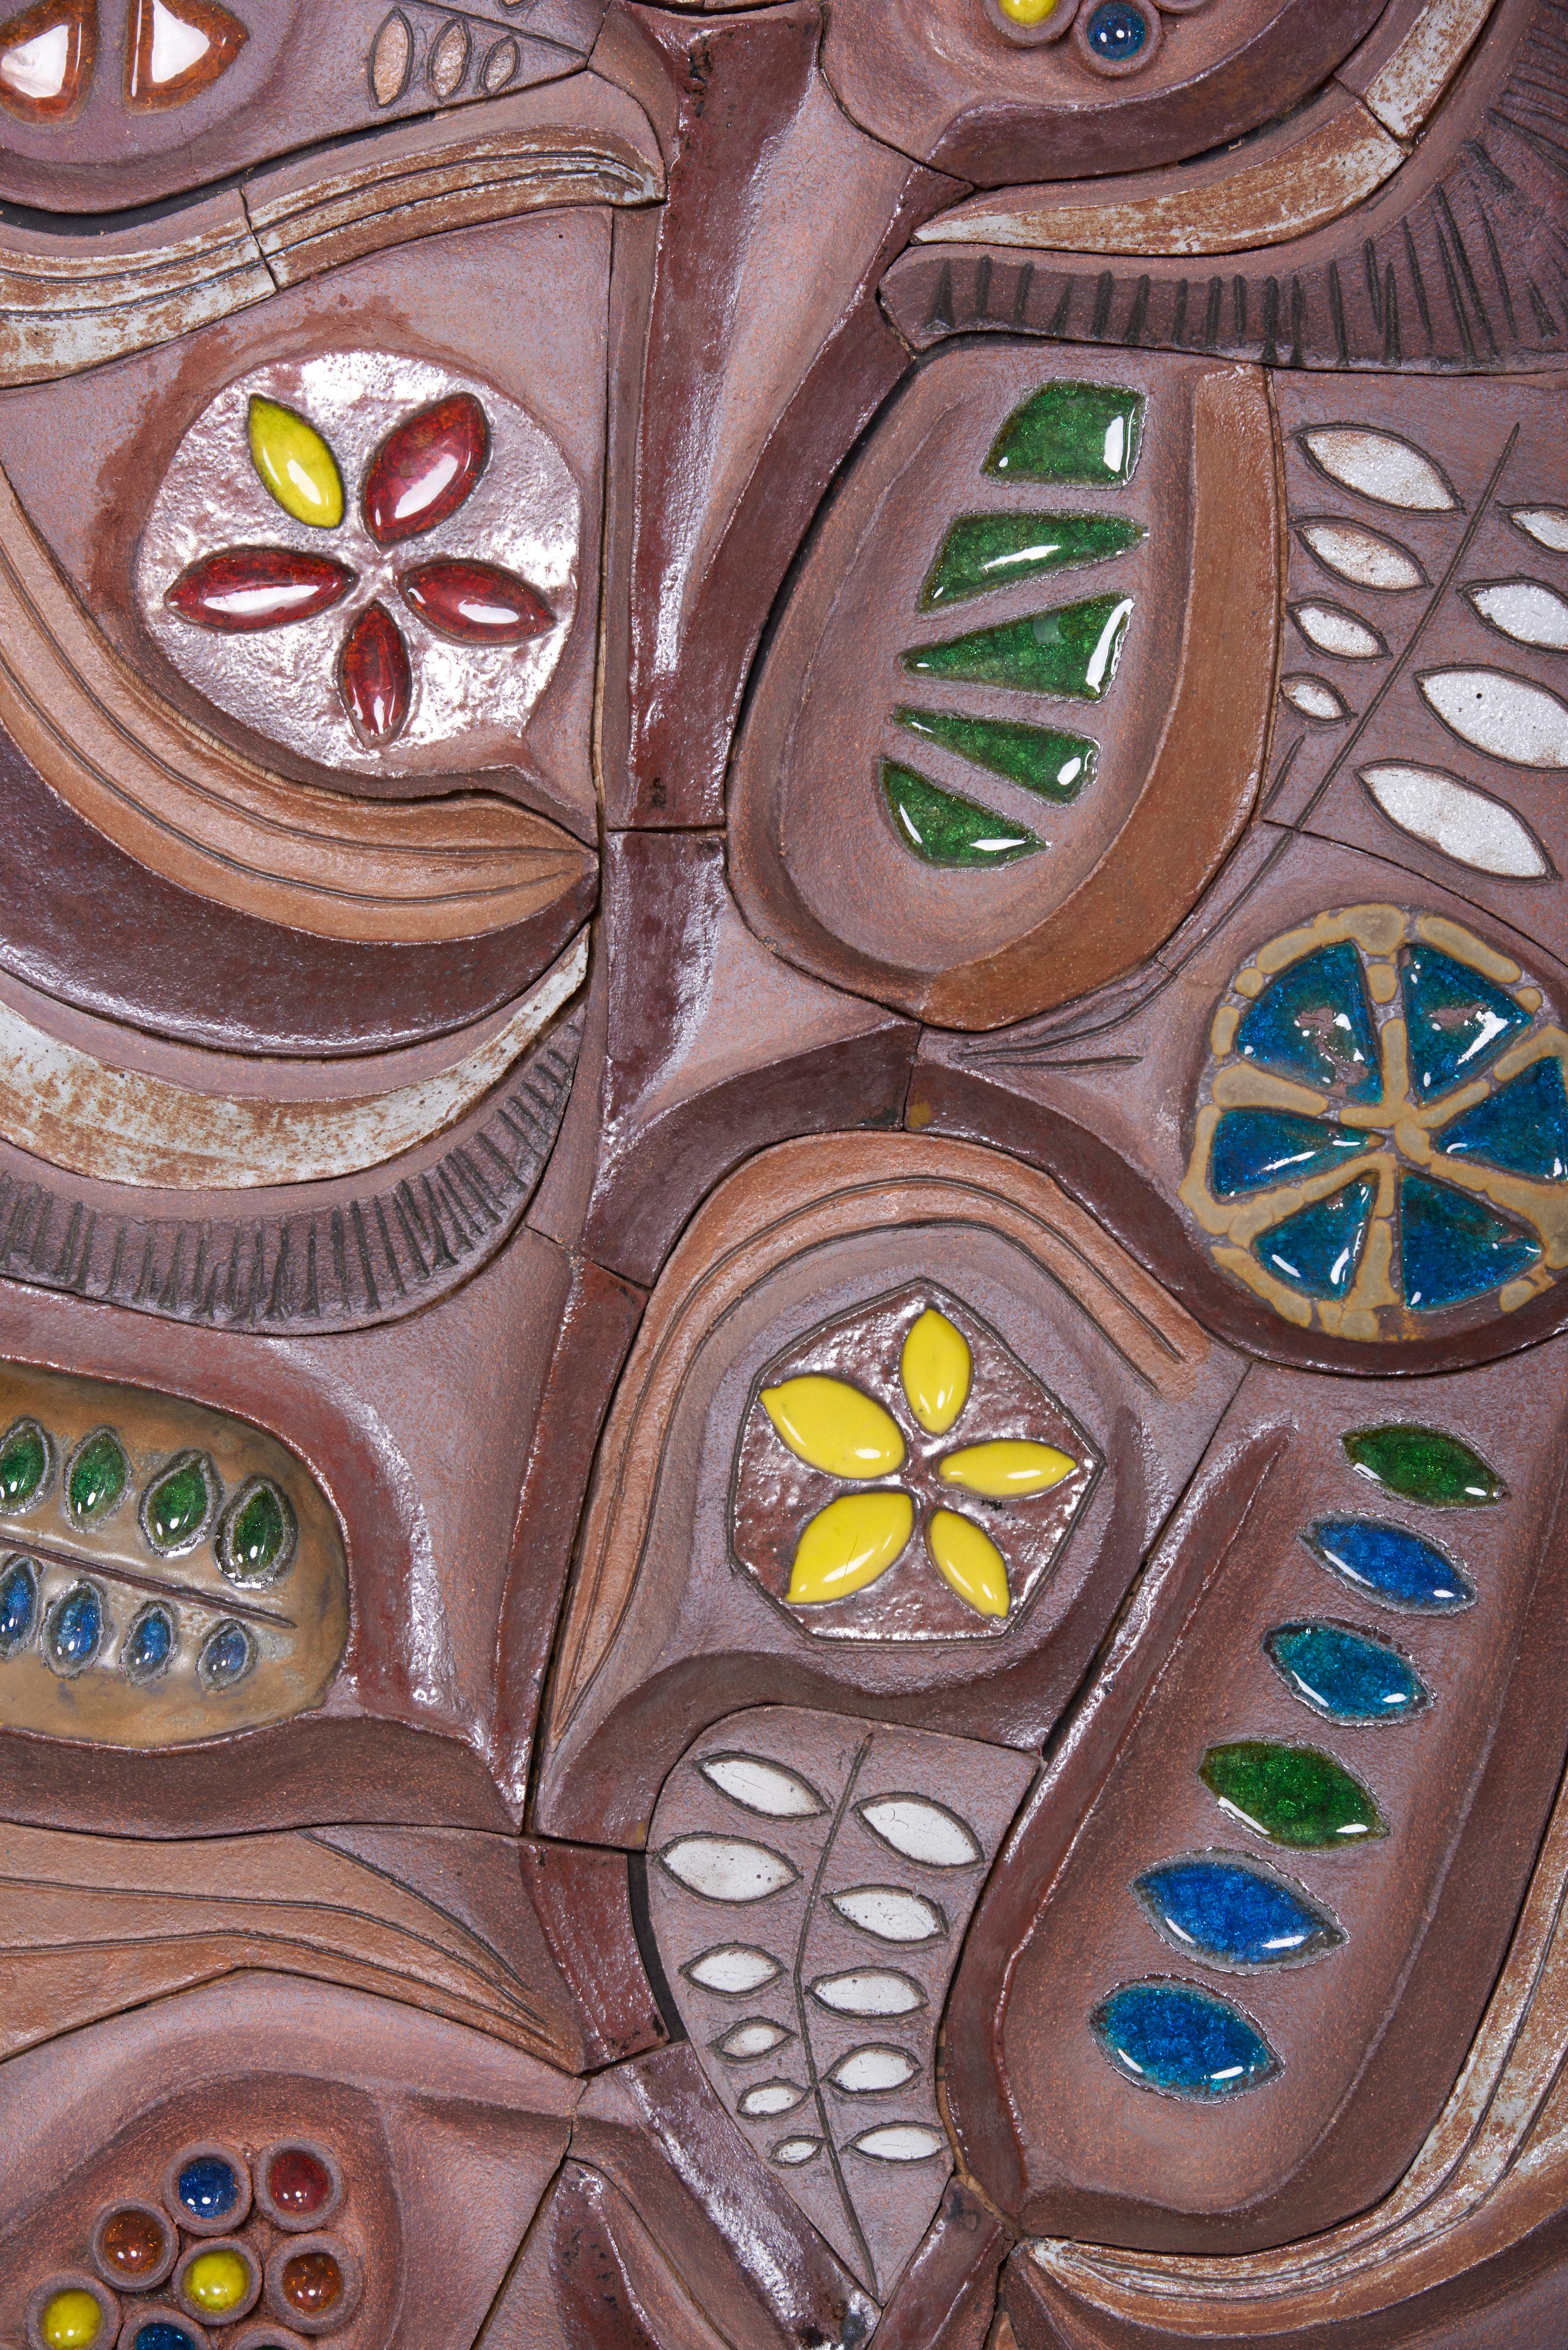 One of a kind panel with organic botanical motif.
Can be used either indoors or outdoors.
Shown in natural clay with glazes and melted glass in a steel frame.
Created 2019 by Brent J. Bennett, US (signed). Measures: 22” x 55”.

Brent J. Bennett